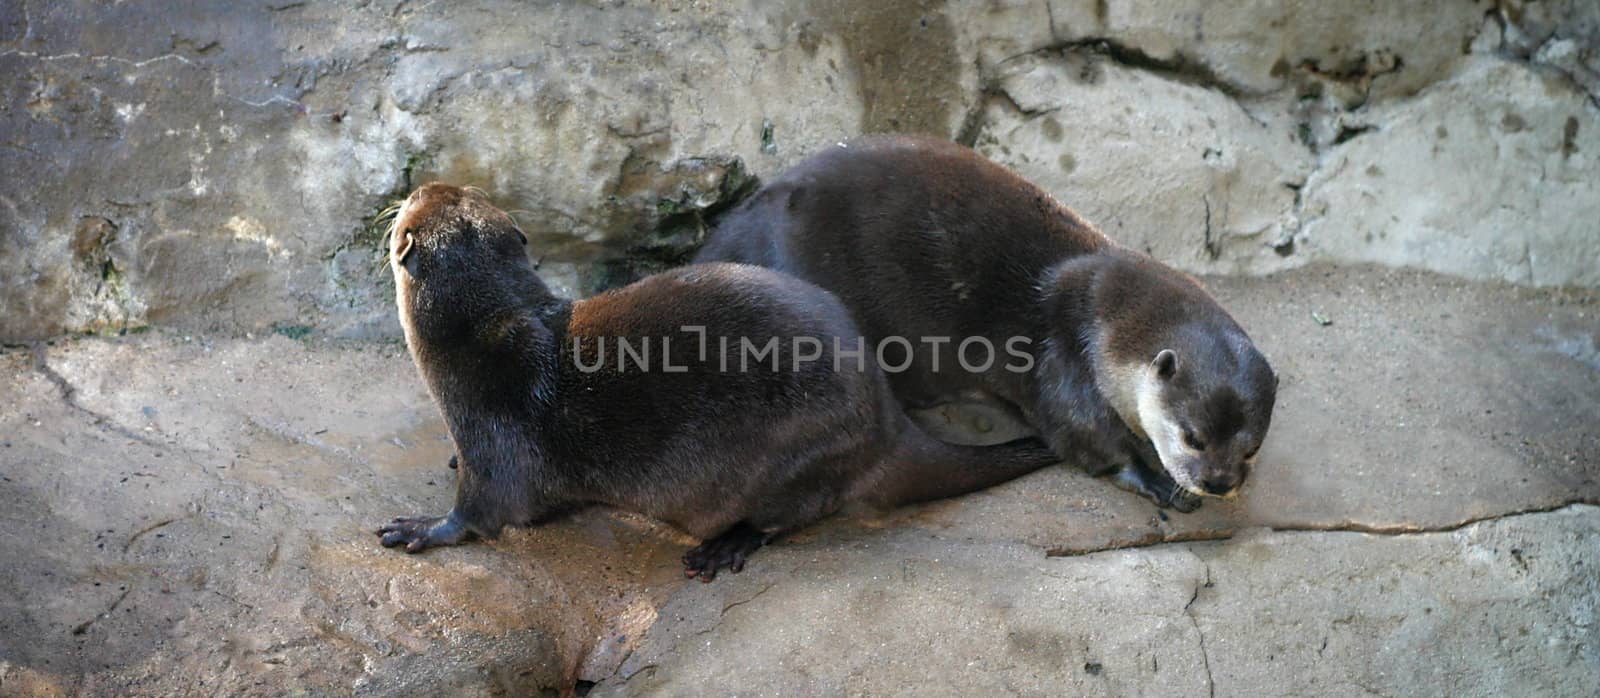 Two otter on stone playing with each other.